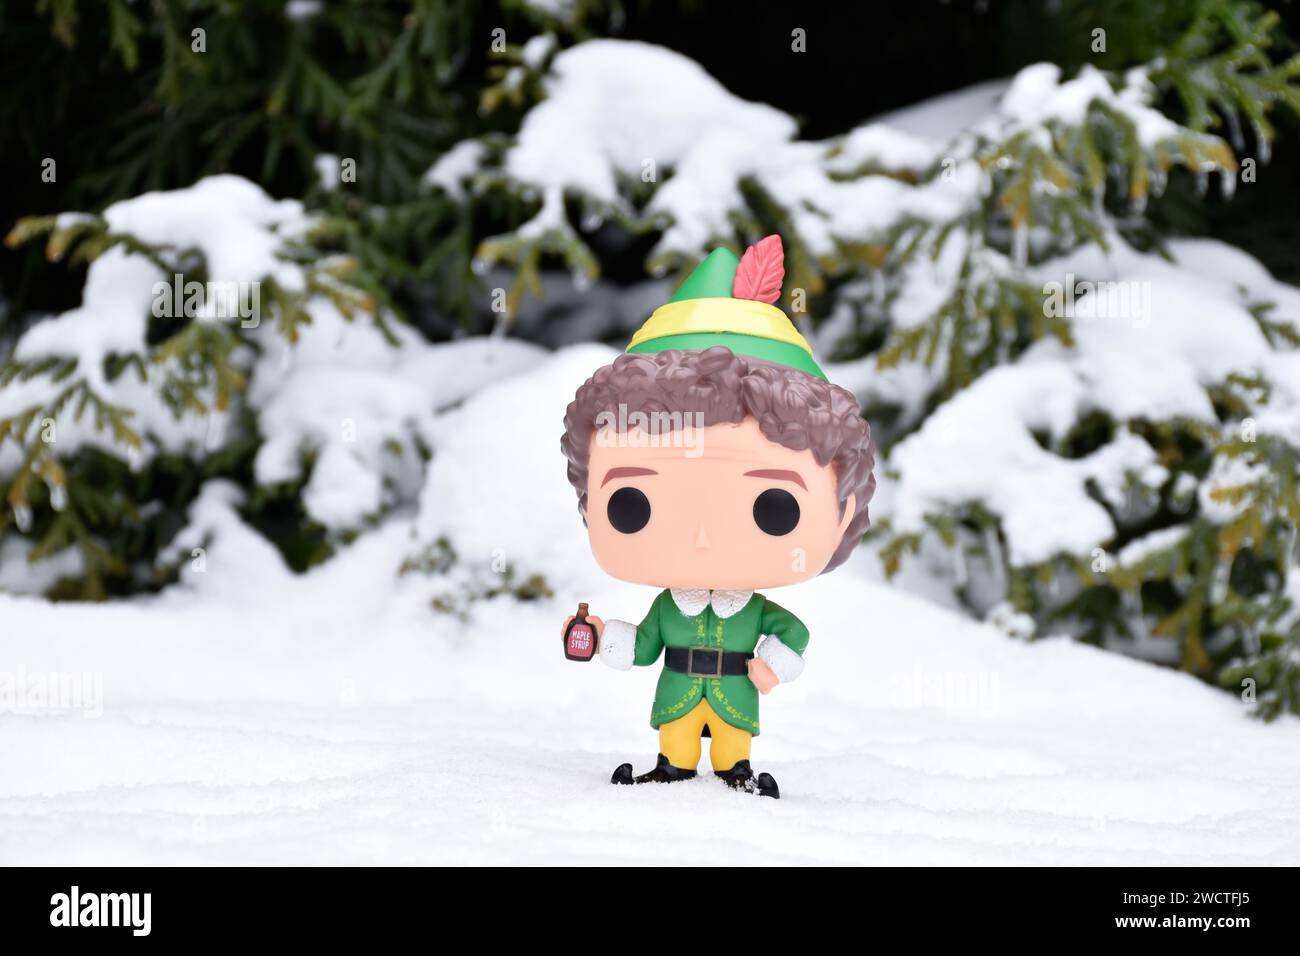 Funko Pop action figure of Buddy from Christmas comedy movie Elf. Winter forest, snow drifts, snowy pine branches, green woods. Stock Photo